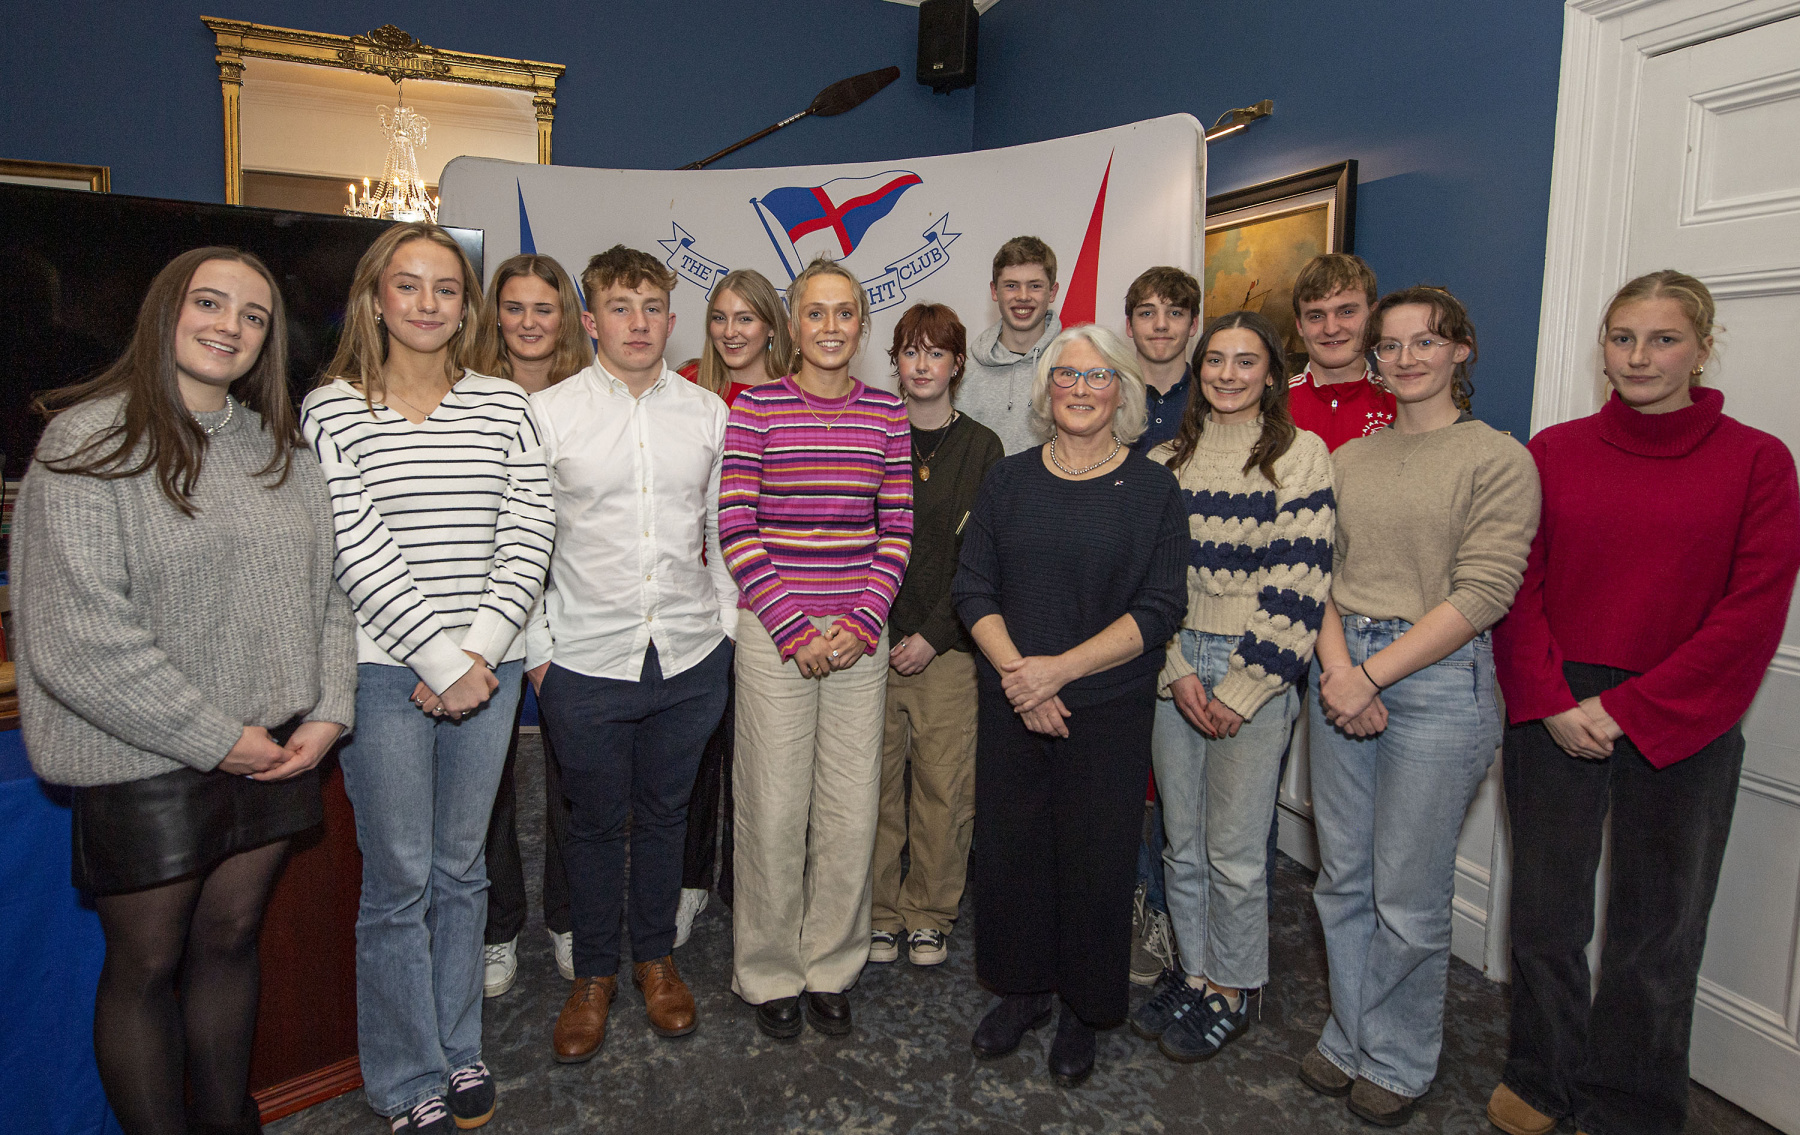 Rosemary Cadogan 
Vice Commodore of the National Yacht Club  
Nicola Ferguson - a BIG Thank you for all the hard work and input into the NYC Junior section a “Diamond”

*****No Reproduction Fee *****

 Pic © Michael Chester  
Phone 0878072295 
info@chester.ie from 
www.chester.ie